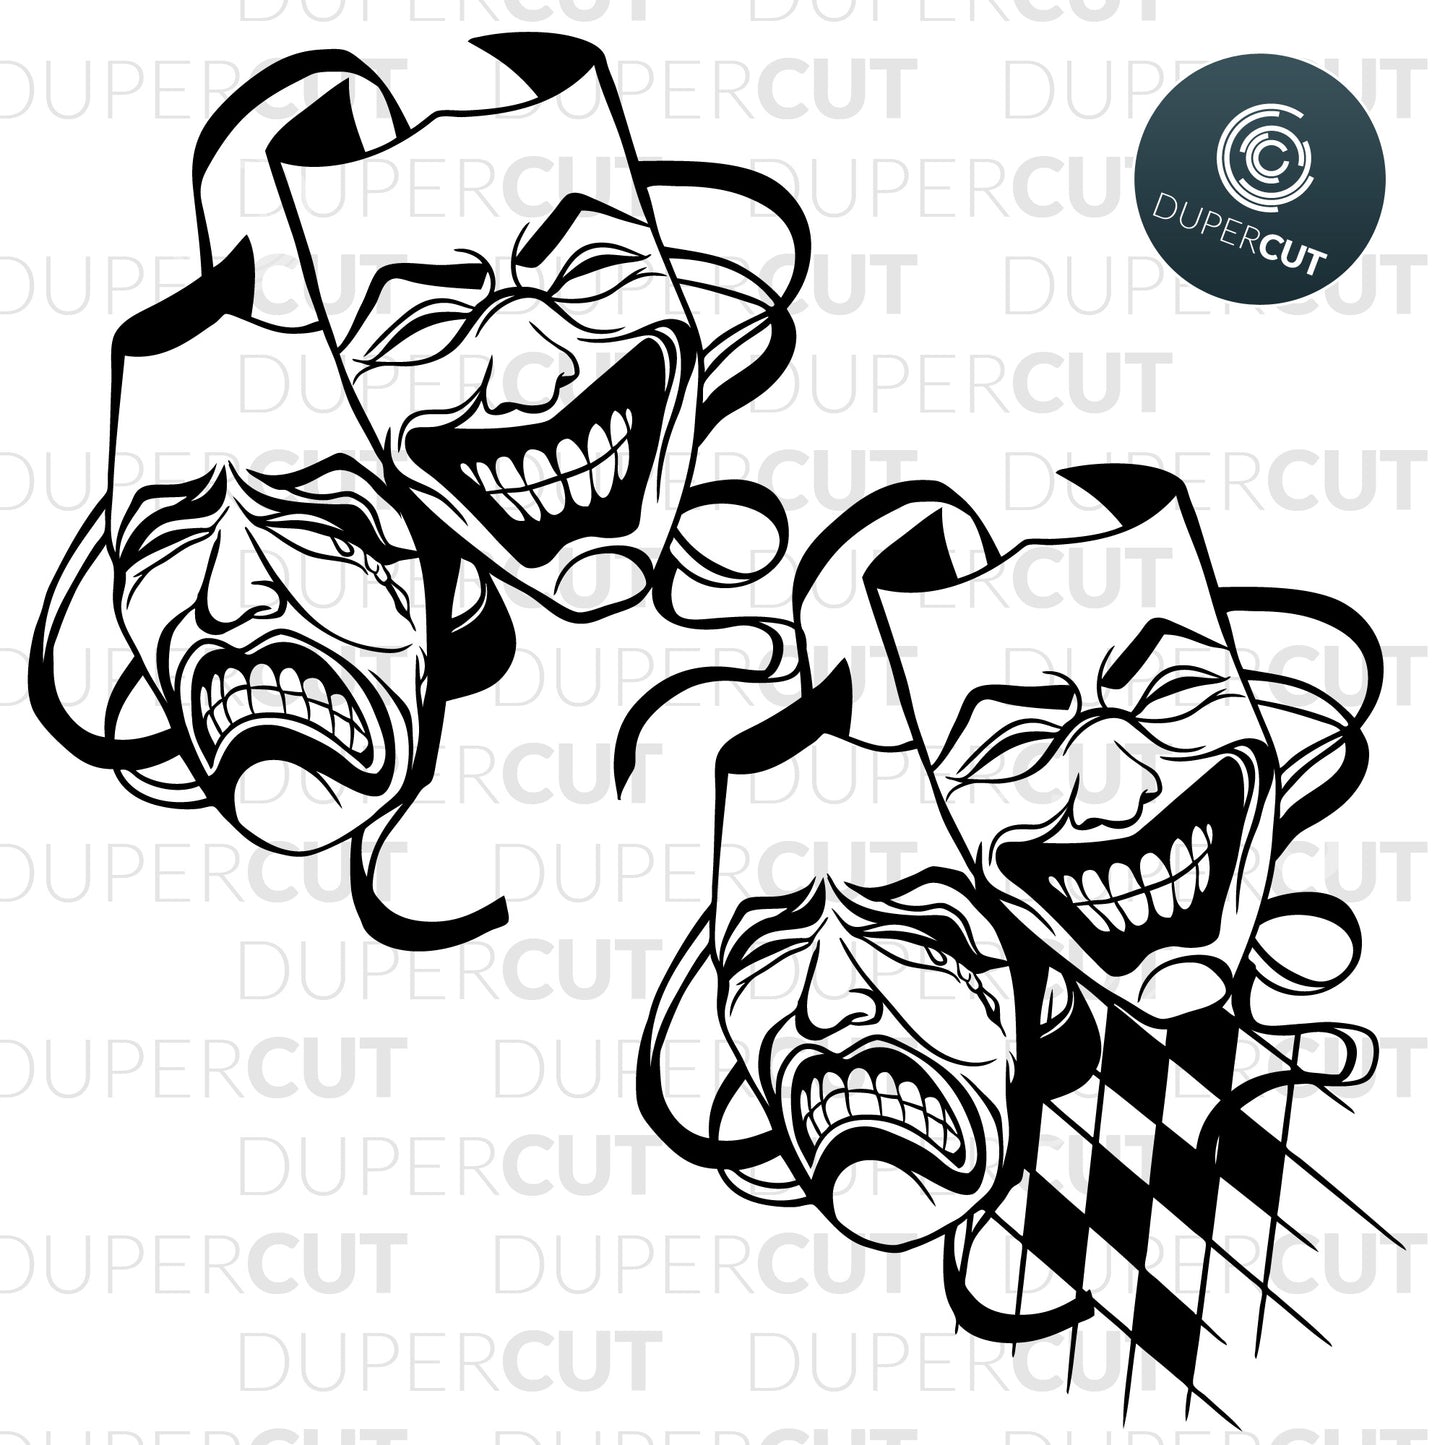 Theater masks, black line art vector  template - SVG DXF PNG files for Cricut, Glowforge, Silhouette Cameo, CNC Machines